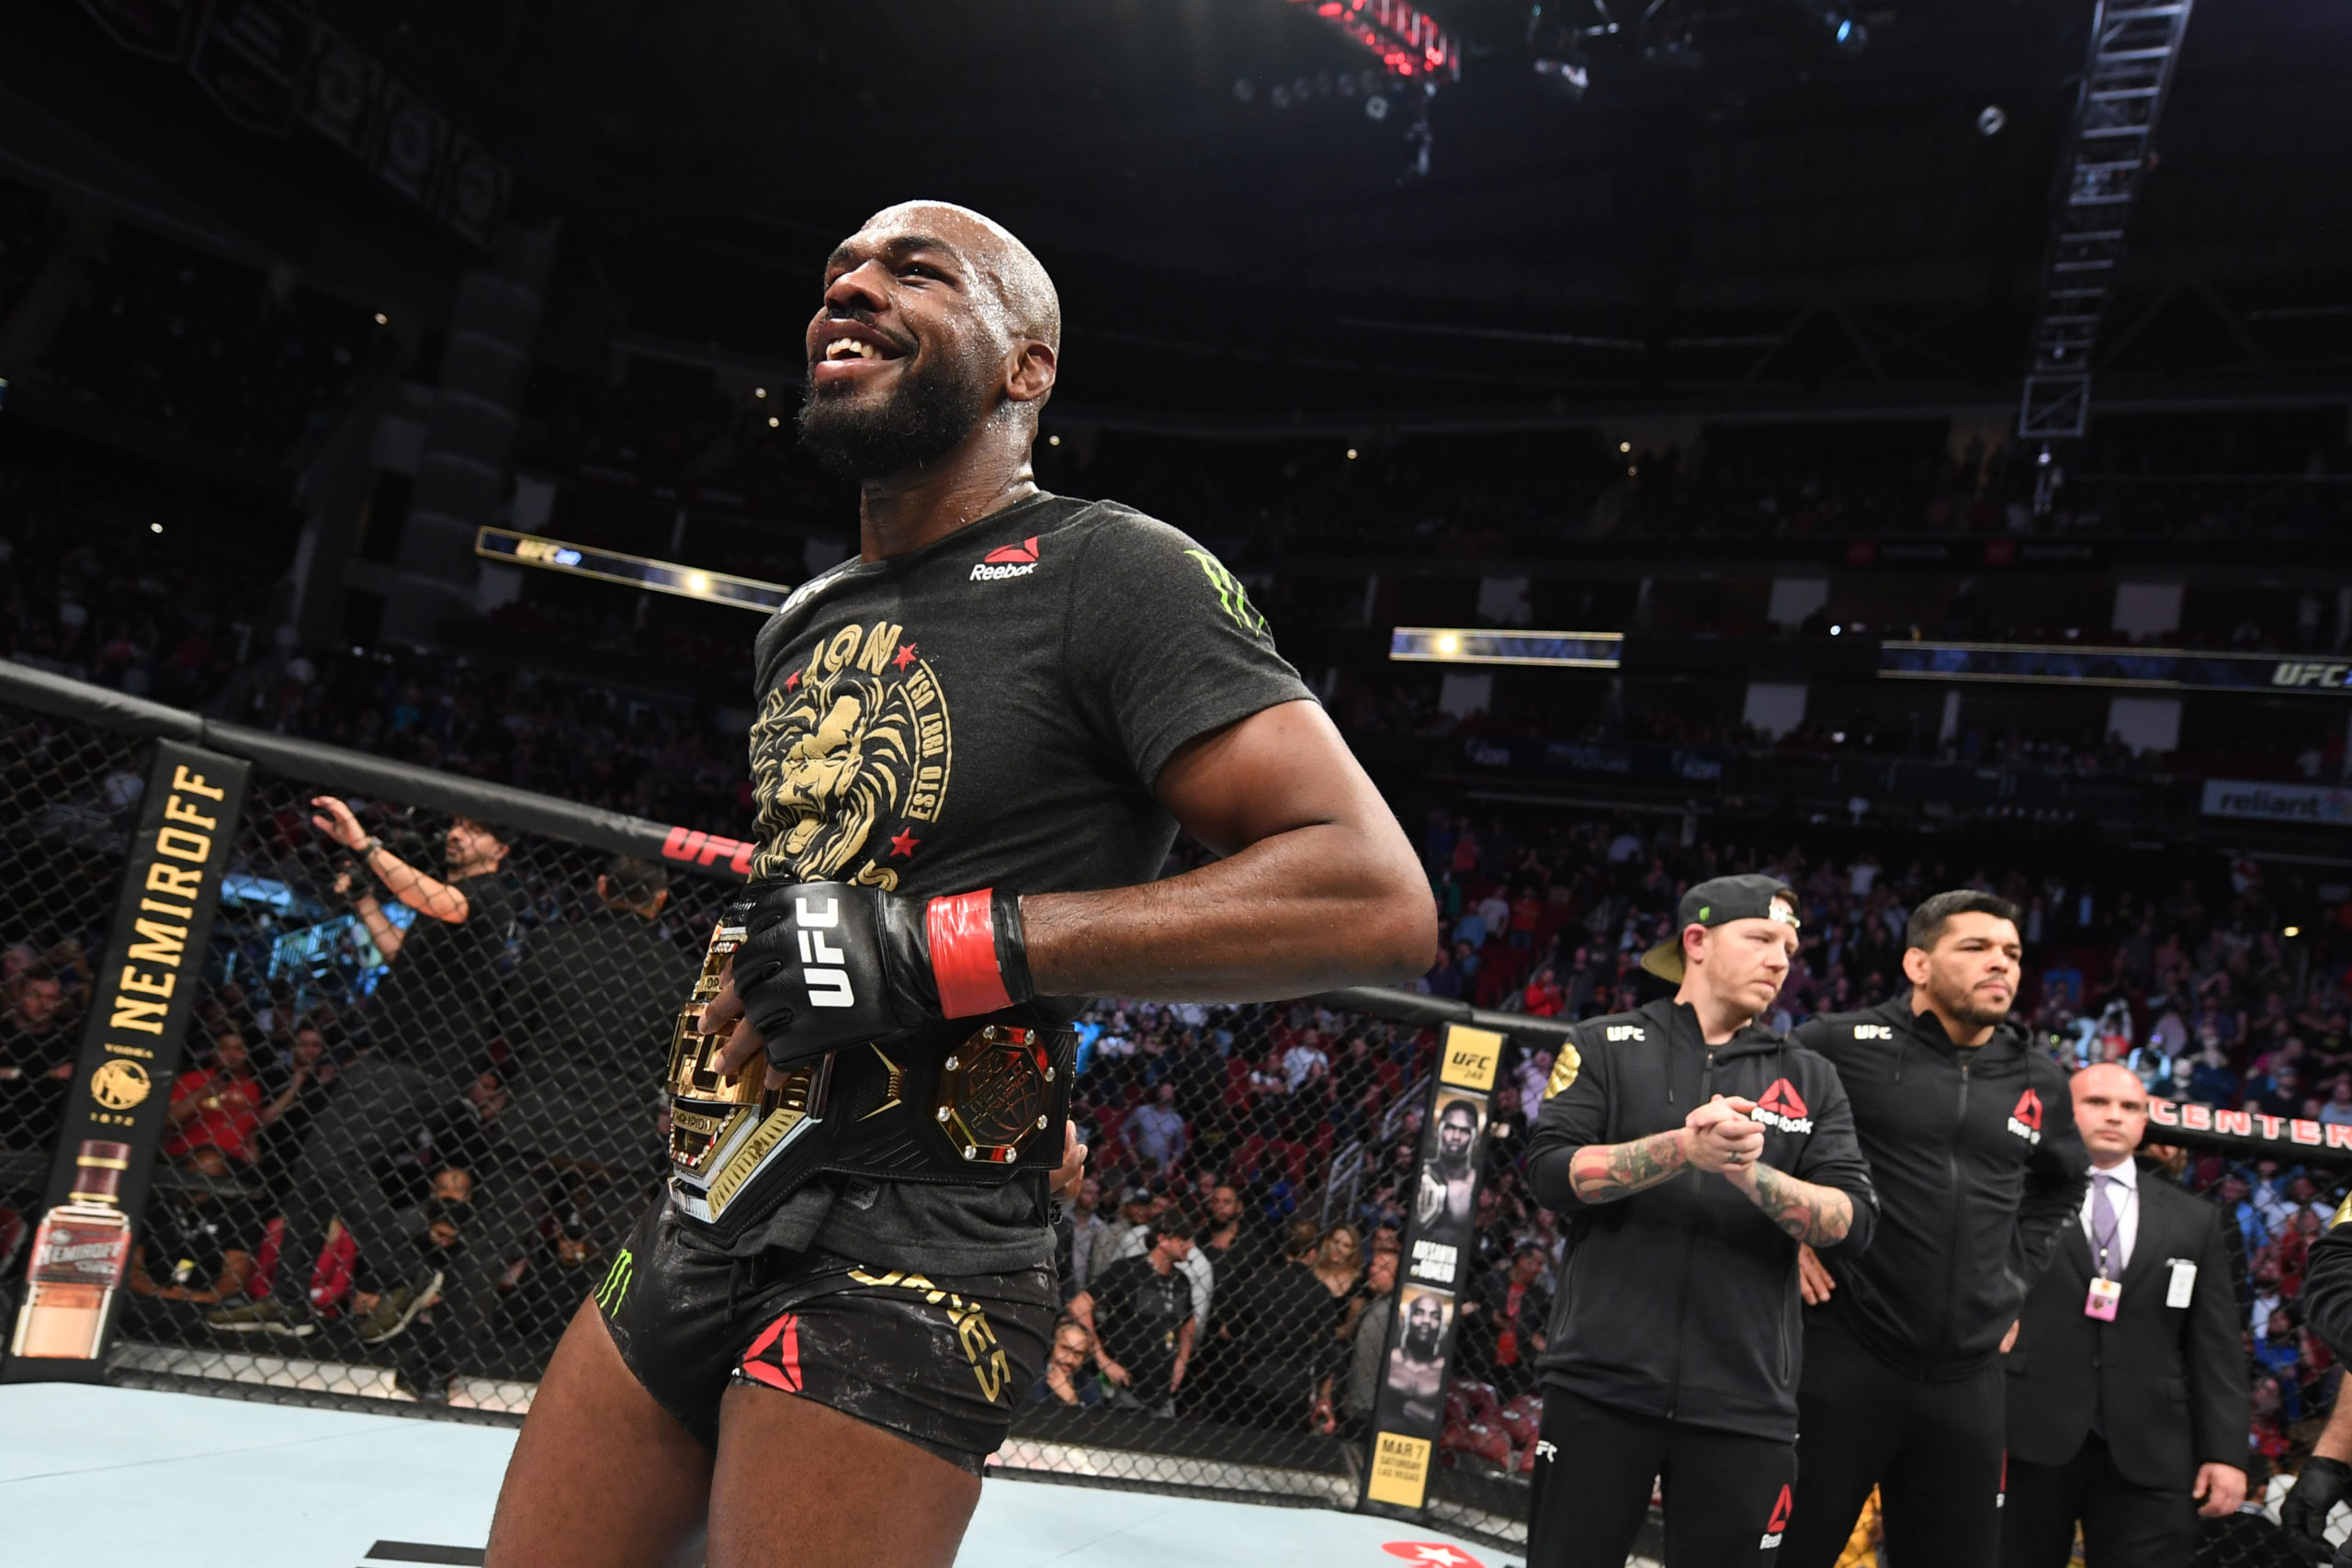 HOUSTON, TEXAS - FEBRUARY 08:  Jon Jones celebrates his victory over Dominick Reyes in their light heavyweight championship bout during the UFC 247 event at Toyota Center on February 08, 2020 in Houston, Texas. (Photo by Josh Hedges/Zuffa LLC via Getty Images)